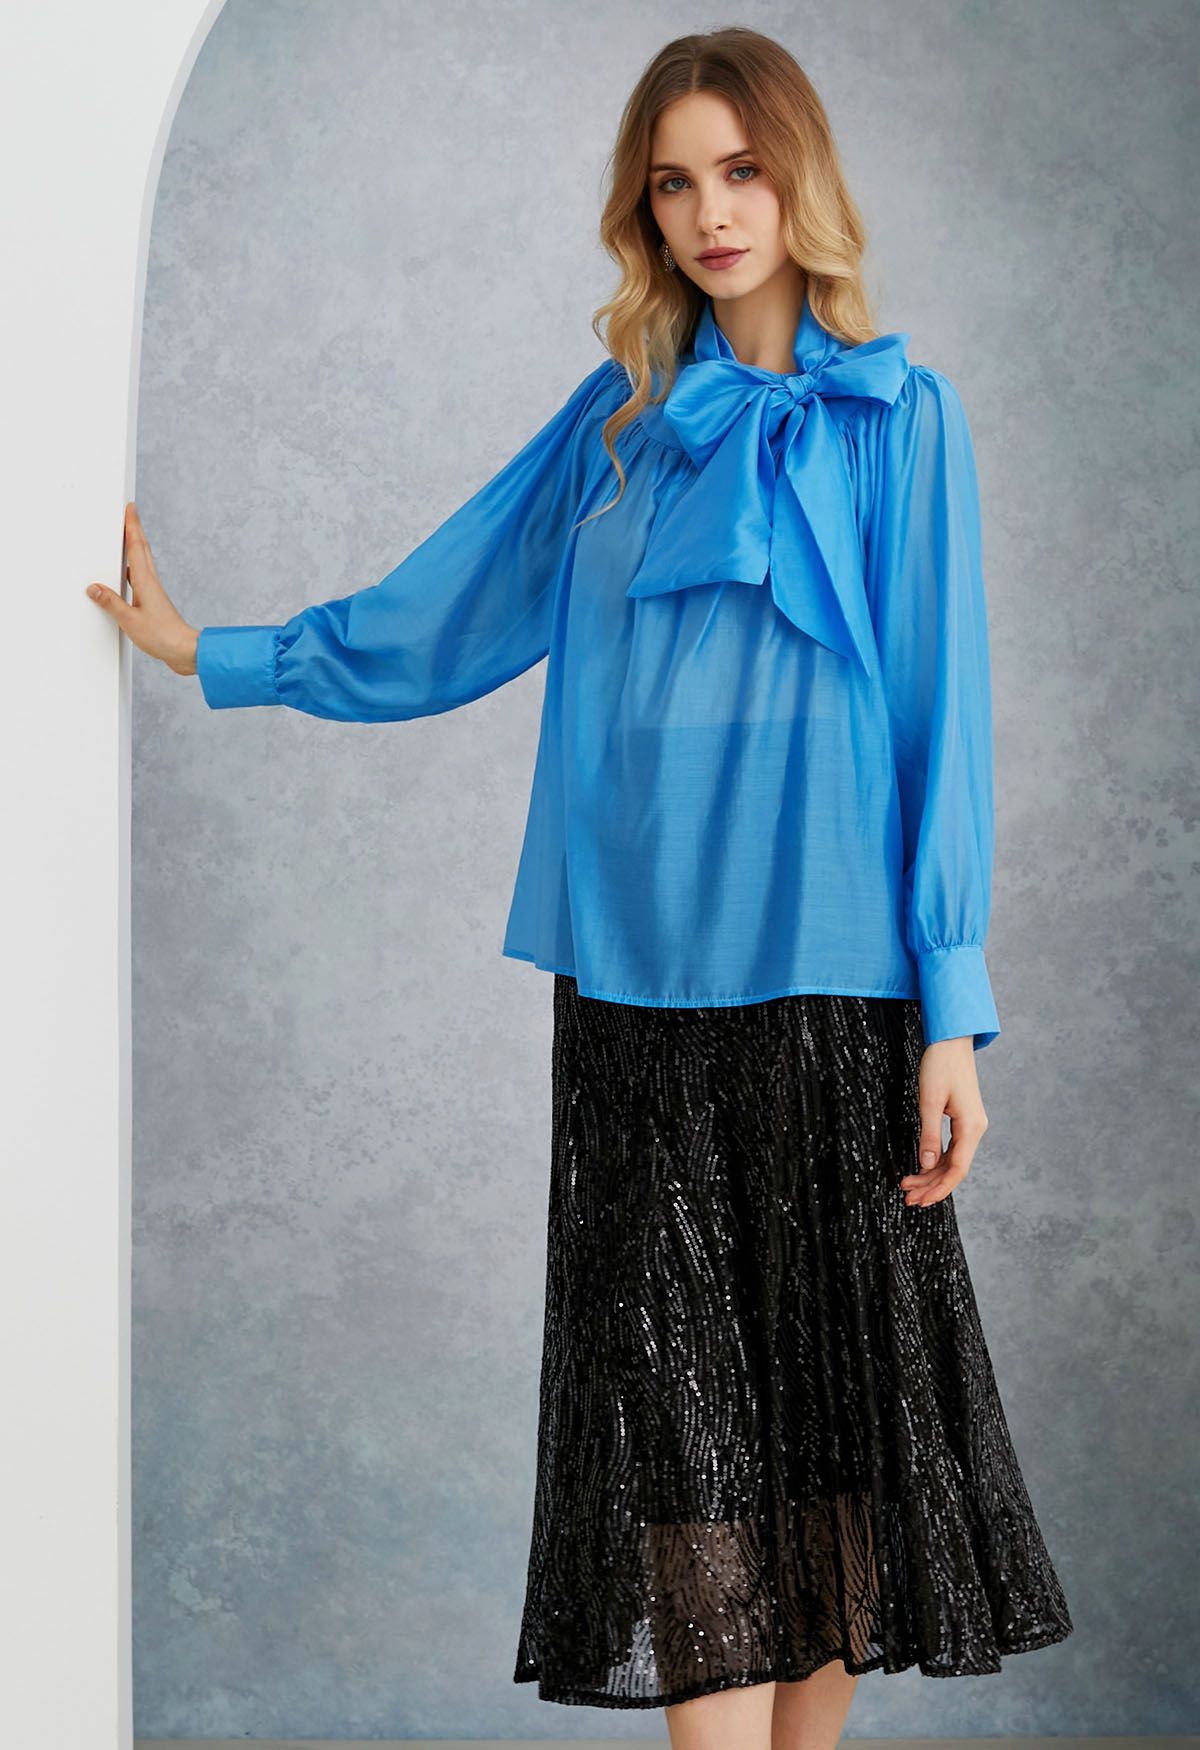 Charming Bowknot Puff Sleeve Sheer Shirt in Blue